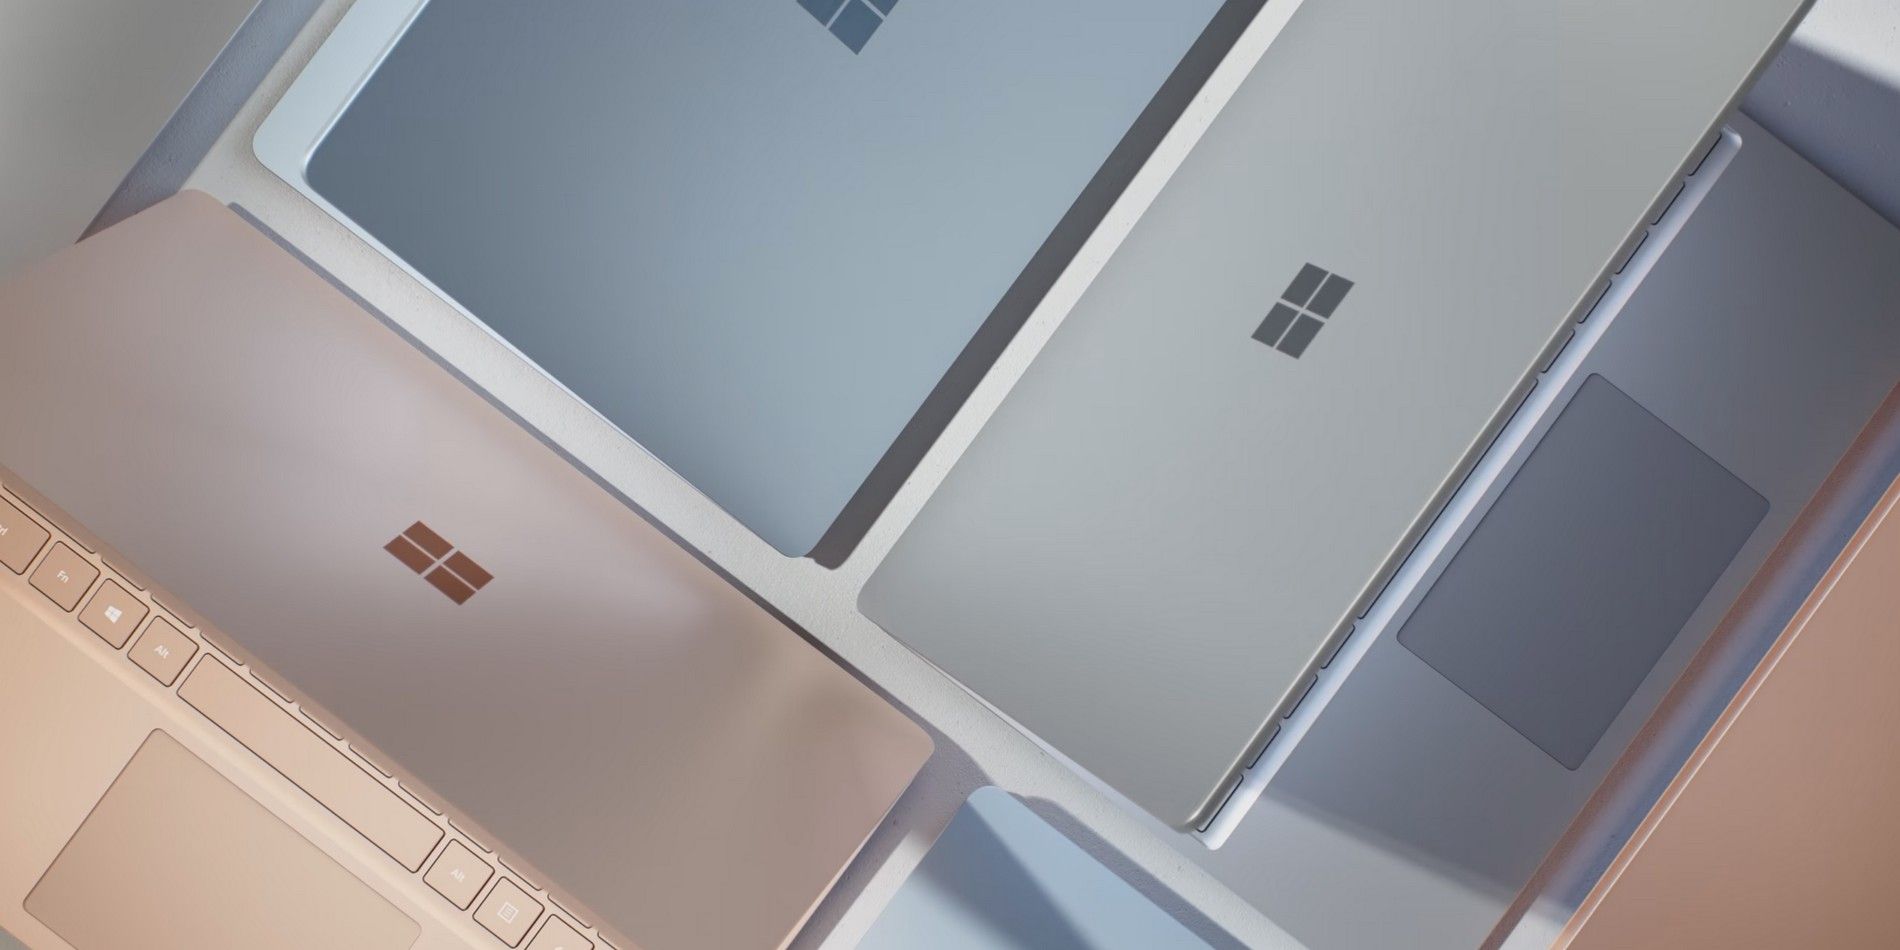 surface laptop to challenge chromebooks